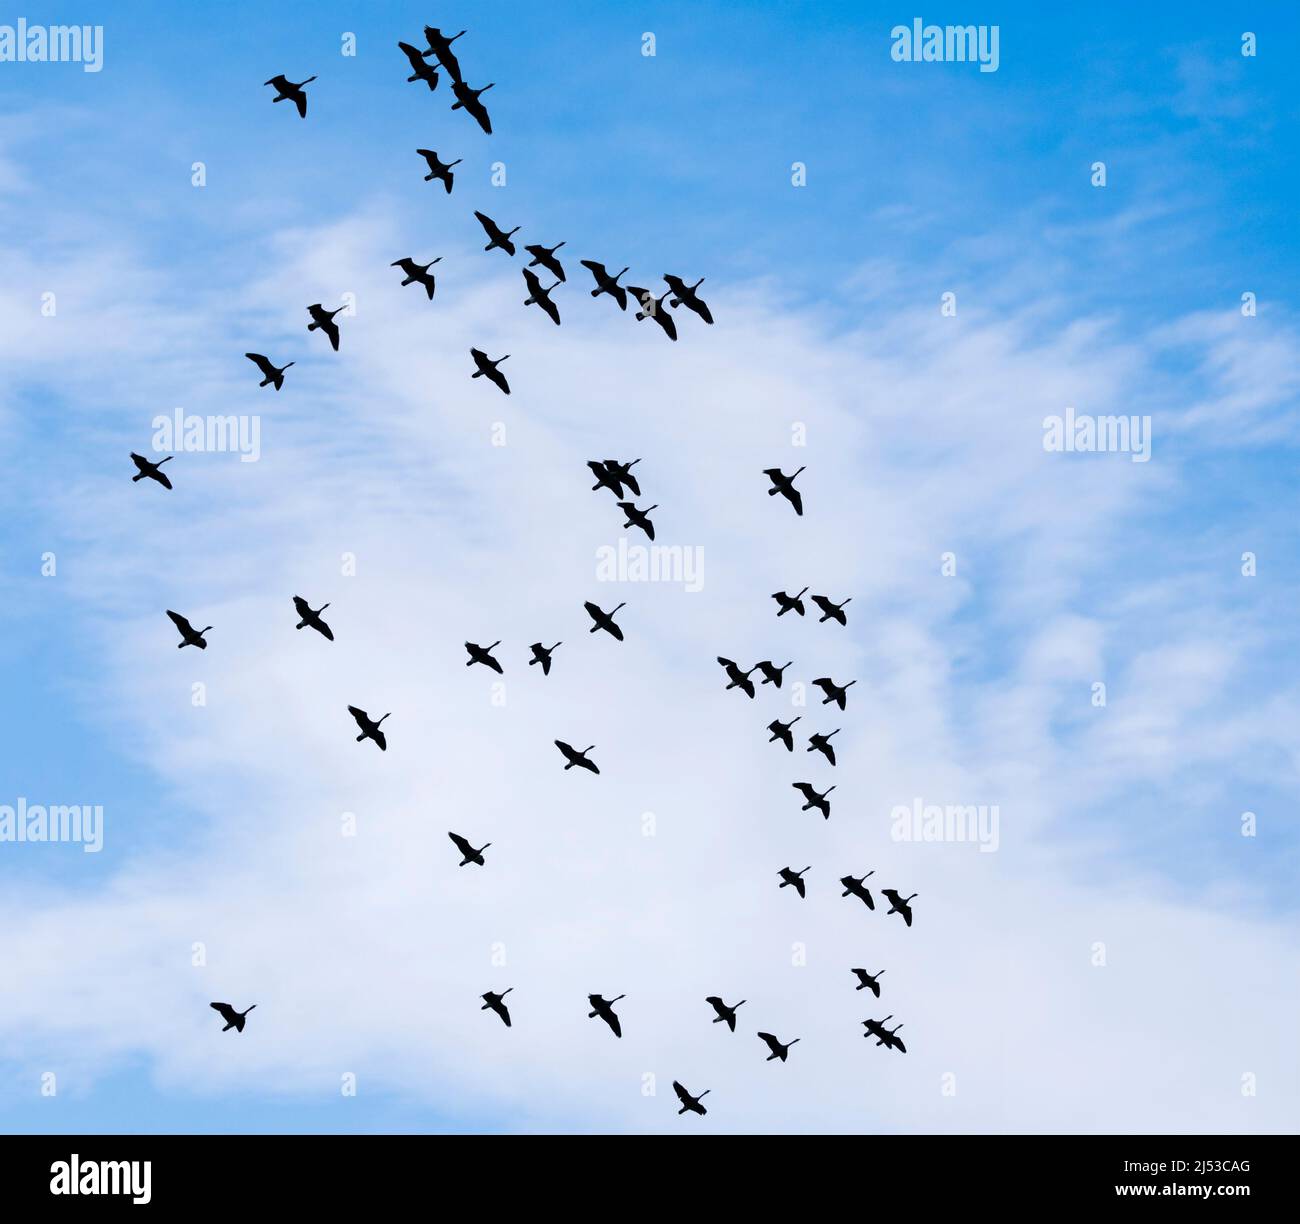 Canada Geese, Branta canadensis, large flock flying directly overhead against blue sky with light clouds. Stock Photo